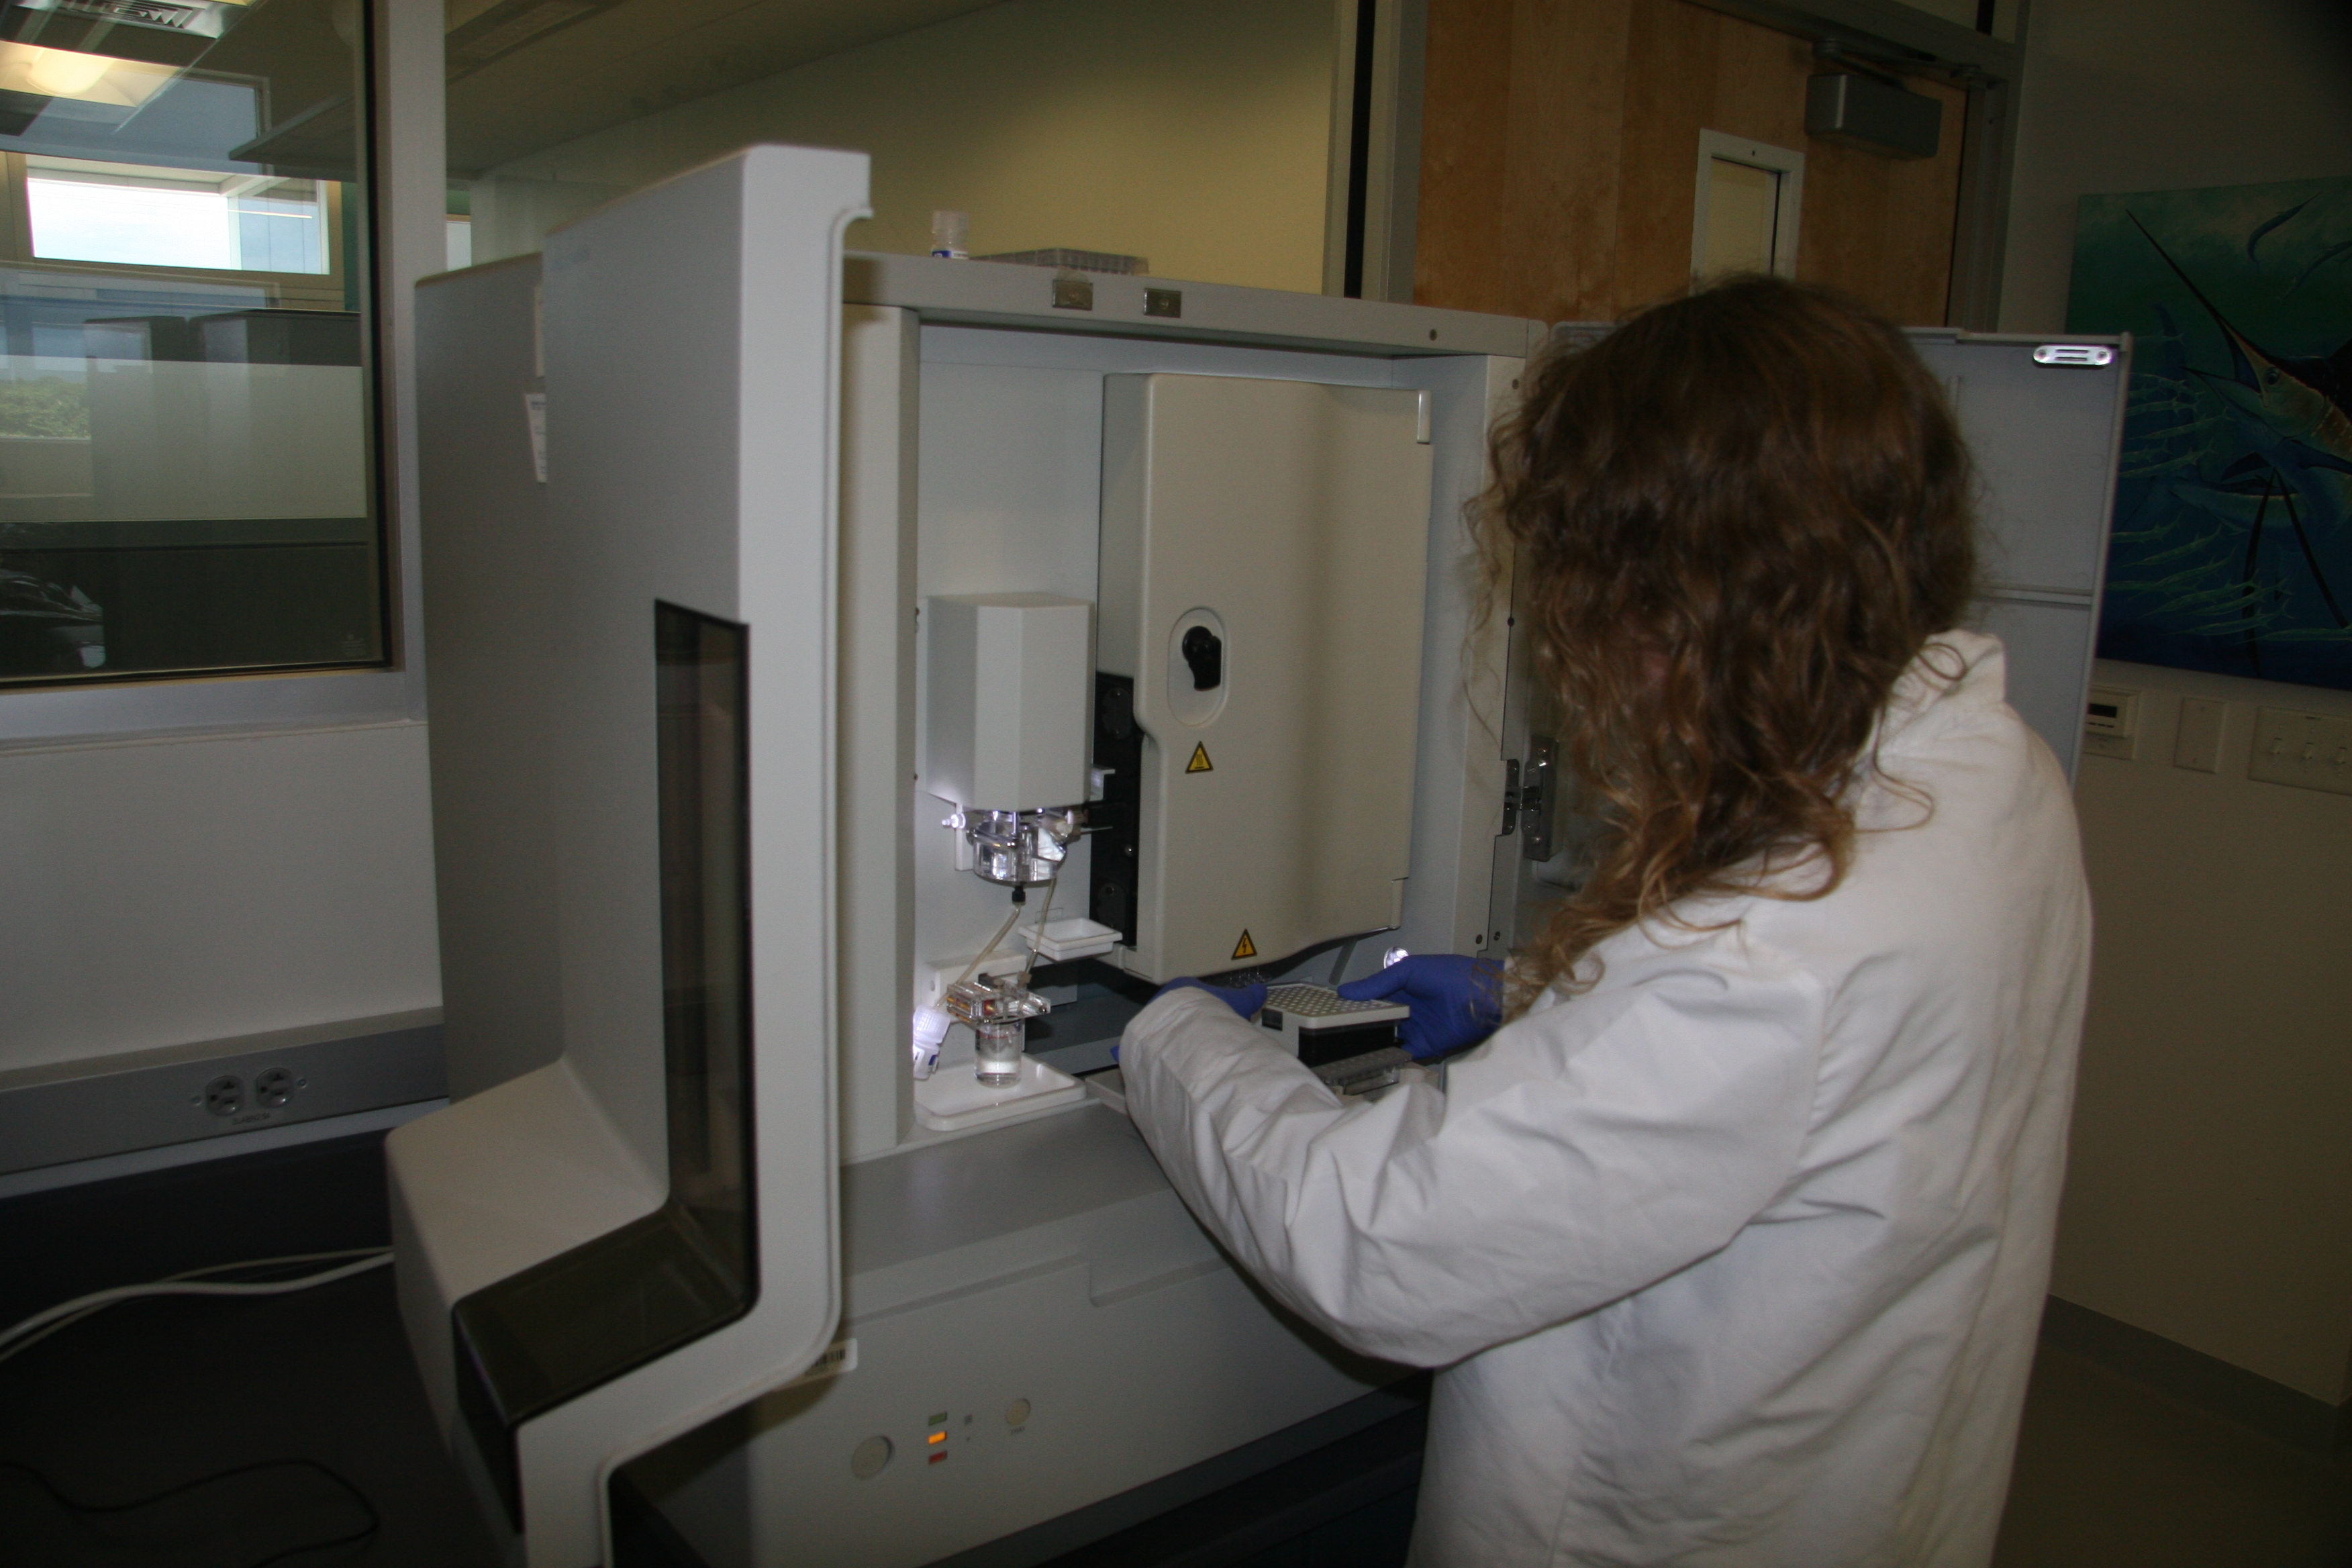  Cassandra Ruck loads a plate of oceanic whitetip genetic samples onto the ABI 3130 Genetic Analyzer to be sequenced. This is at the Save Our Seas Shark Centre USA and Guy Harvey Research Institute at Nova Southeastern University’s Oceanographic Center.